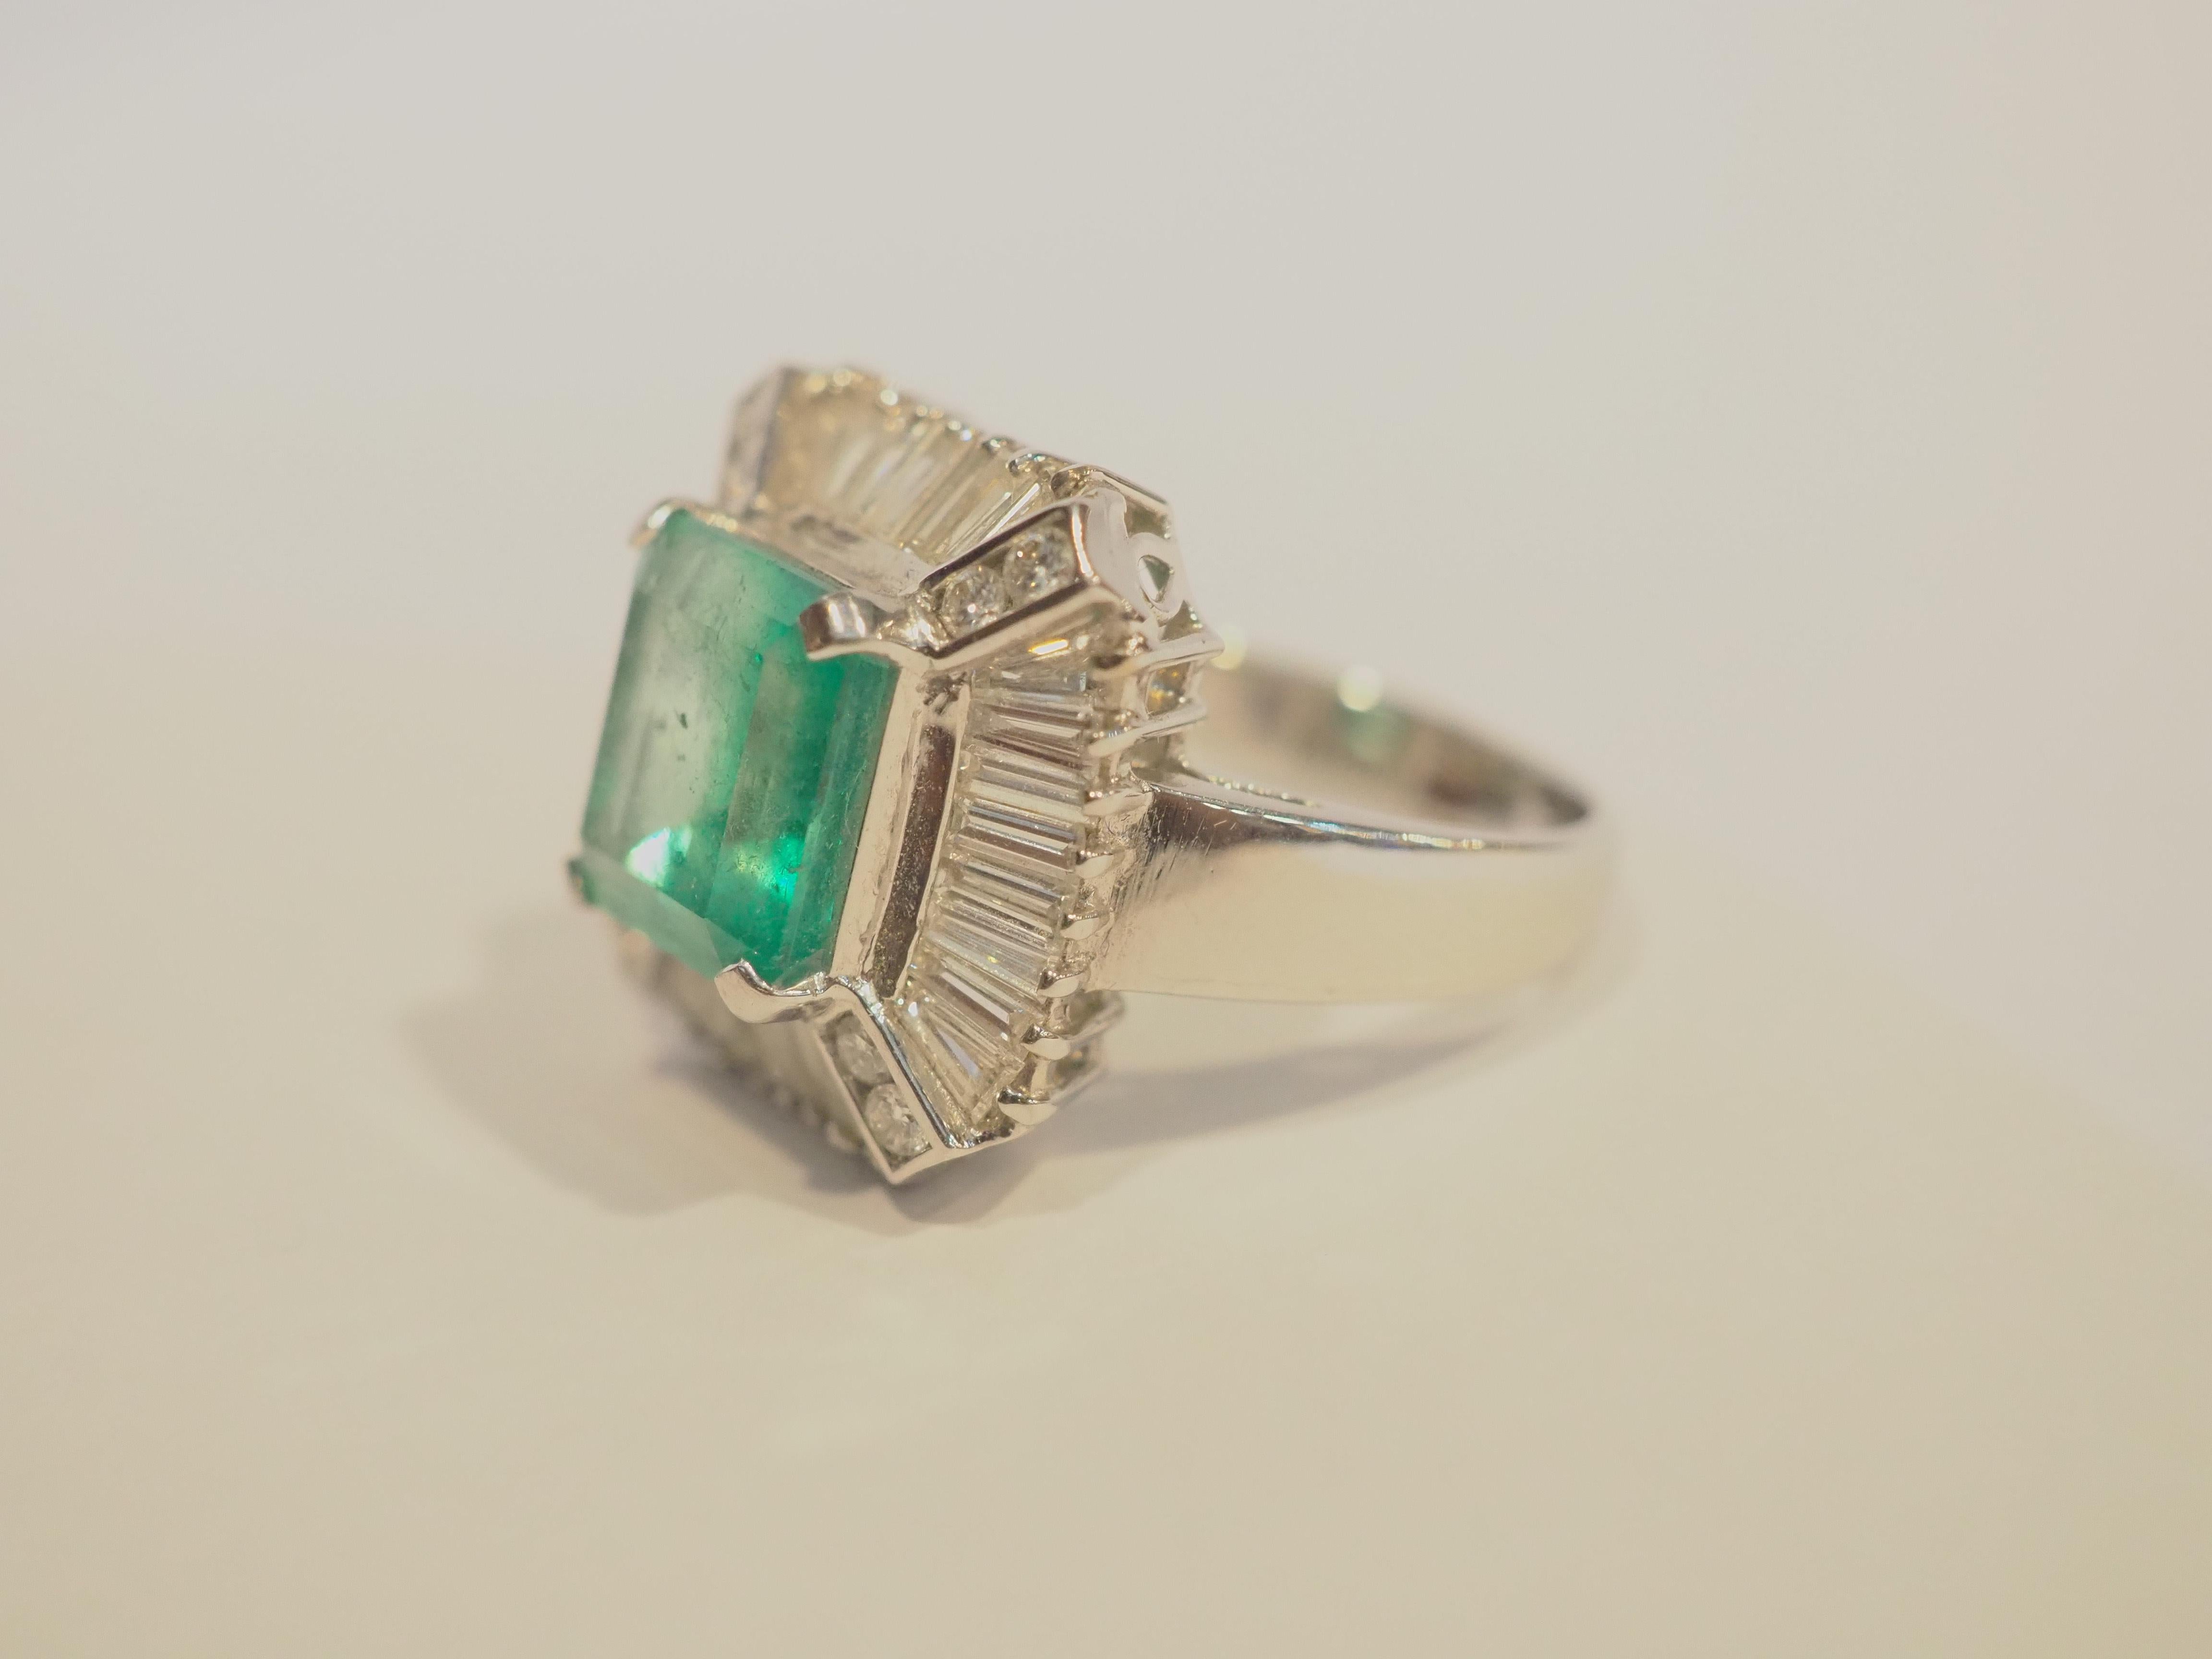 Emerald Cut 18K White Gold 4.68ct Colombian Emerald & 1.65ct Diamond Cocktail Ring For Sale